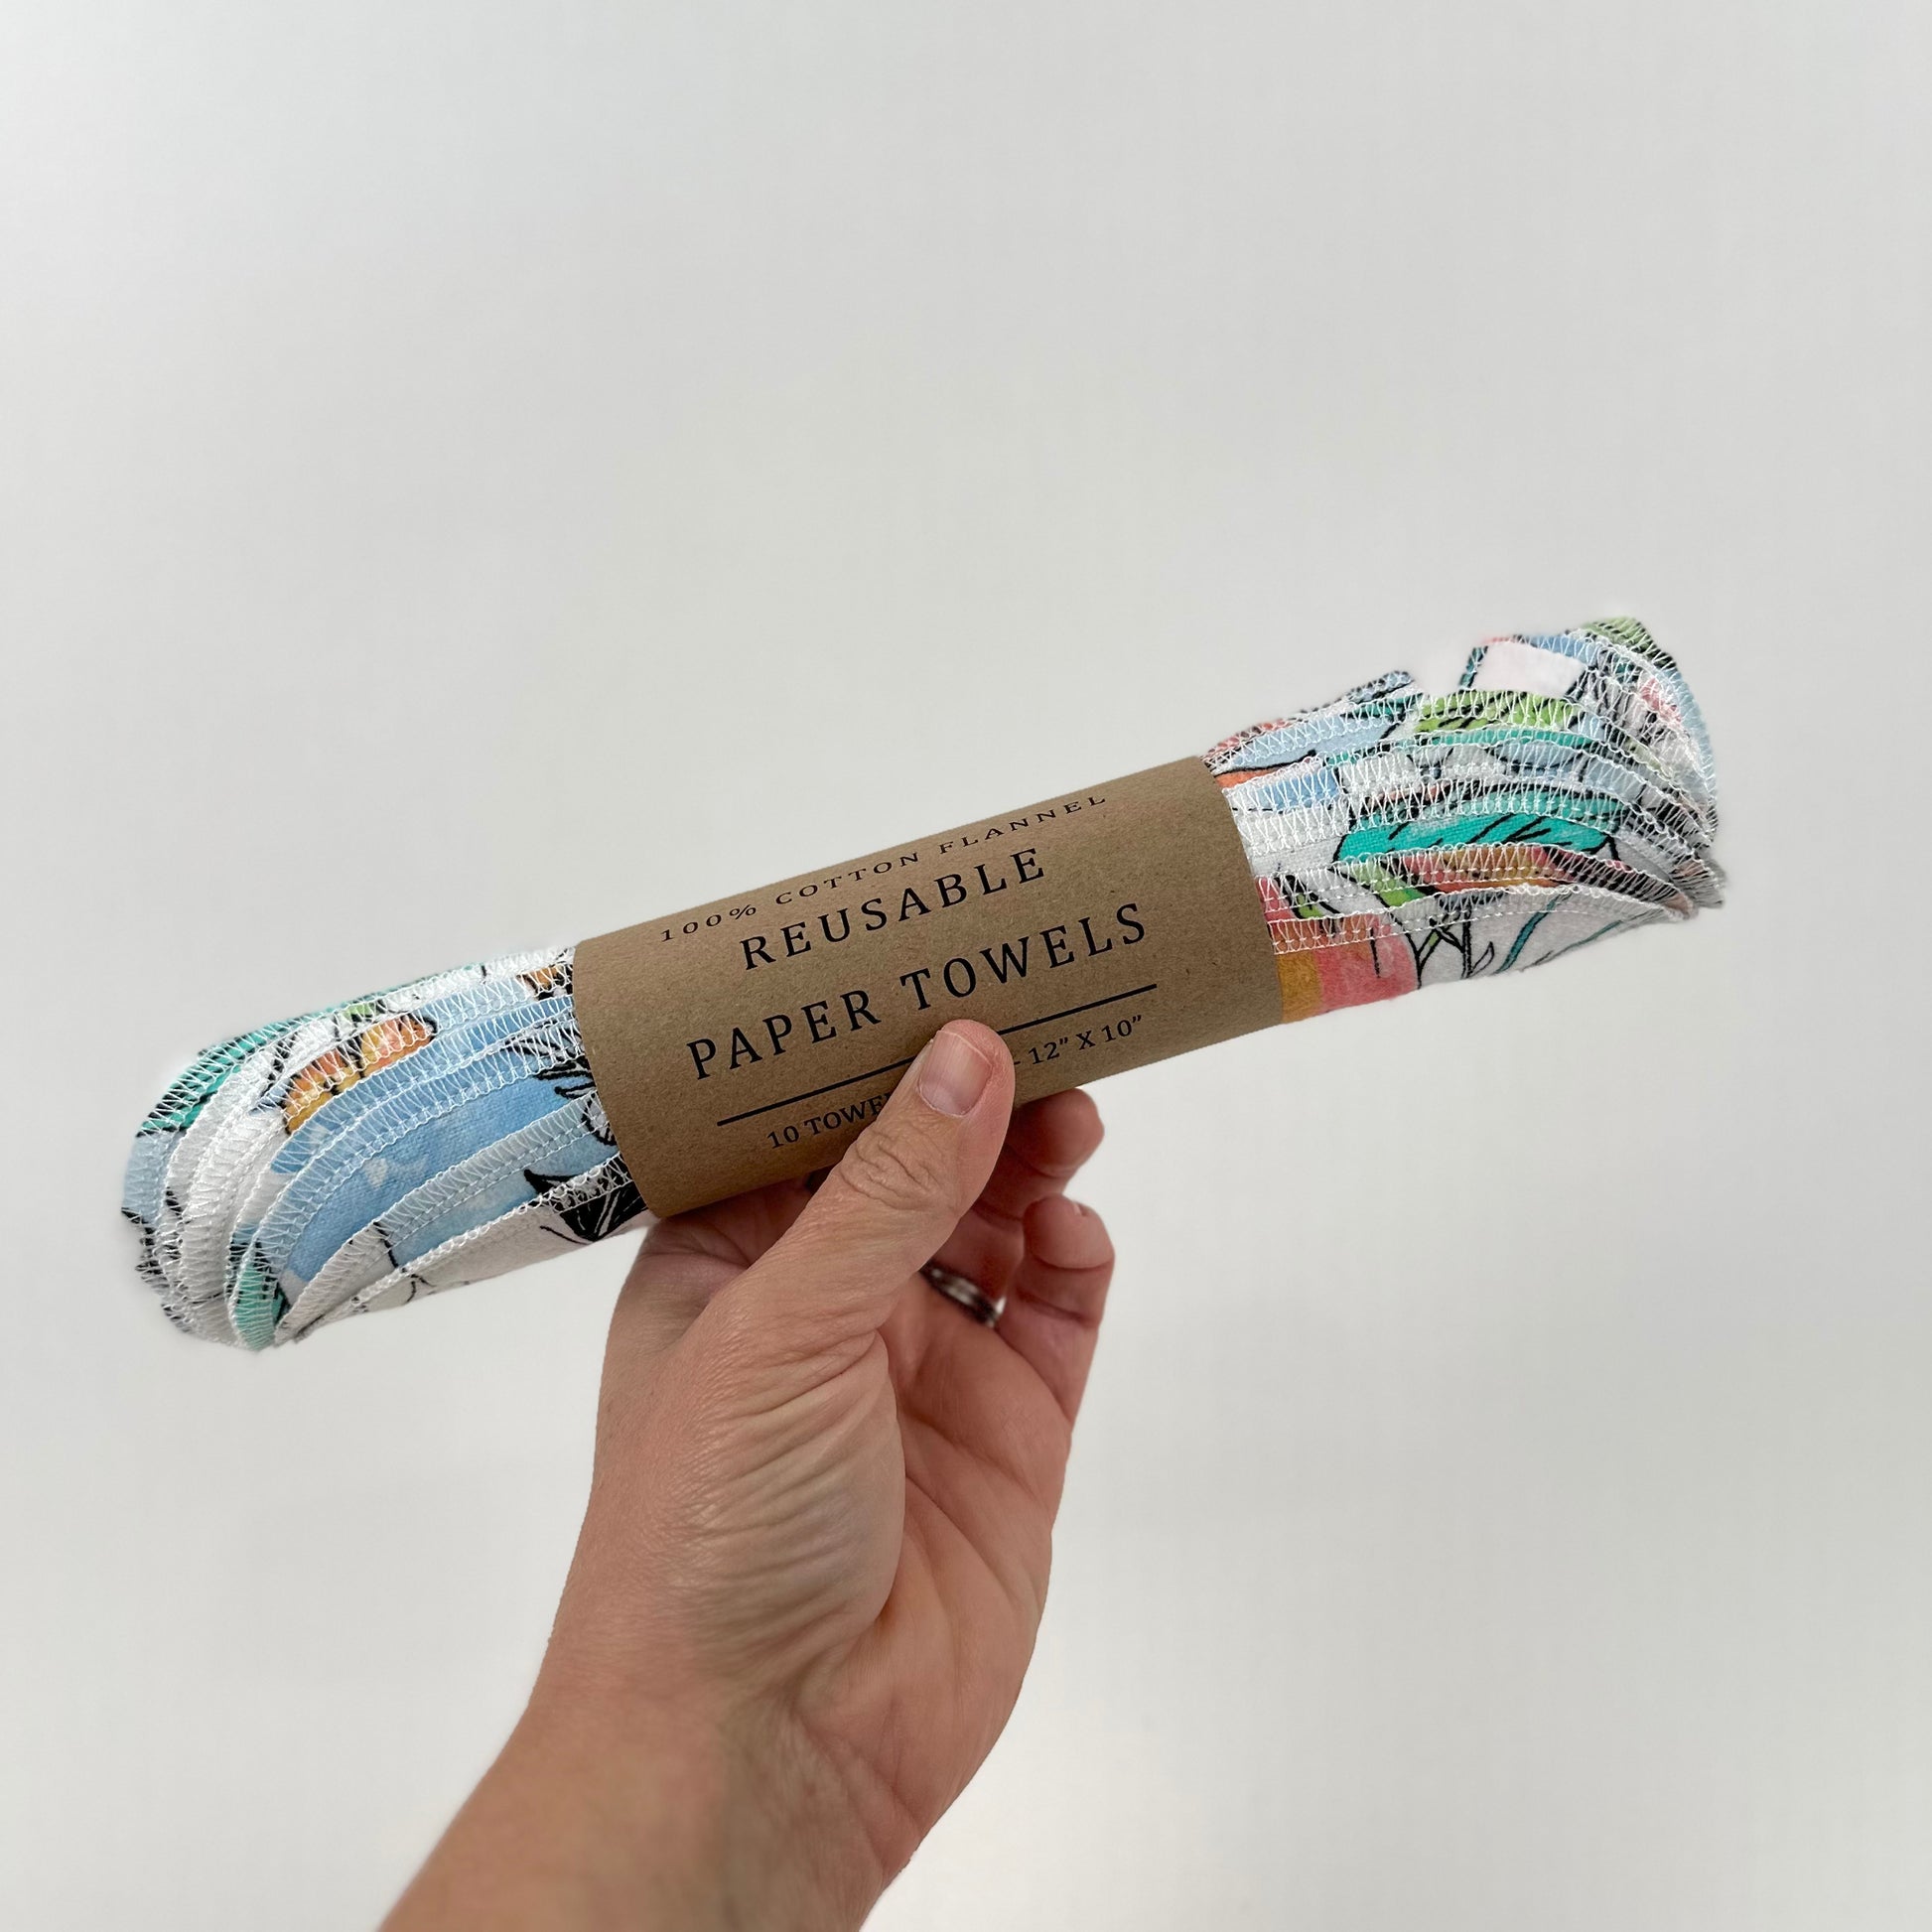 A roll of felt paper towels printed with a pattern of water colored flowers in shades of peach, blue, and green - part of the Miche Niche Reusable Paper Towel collection